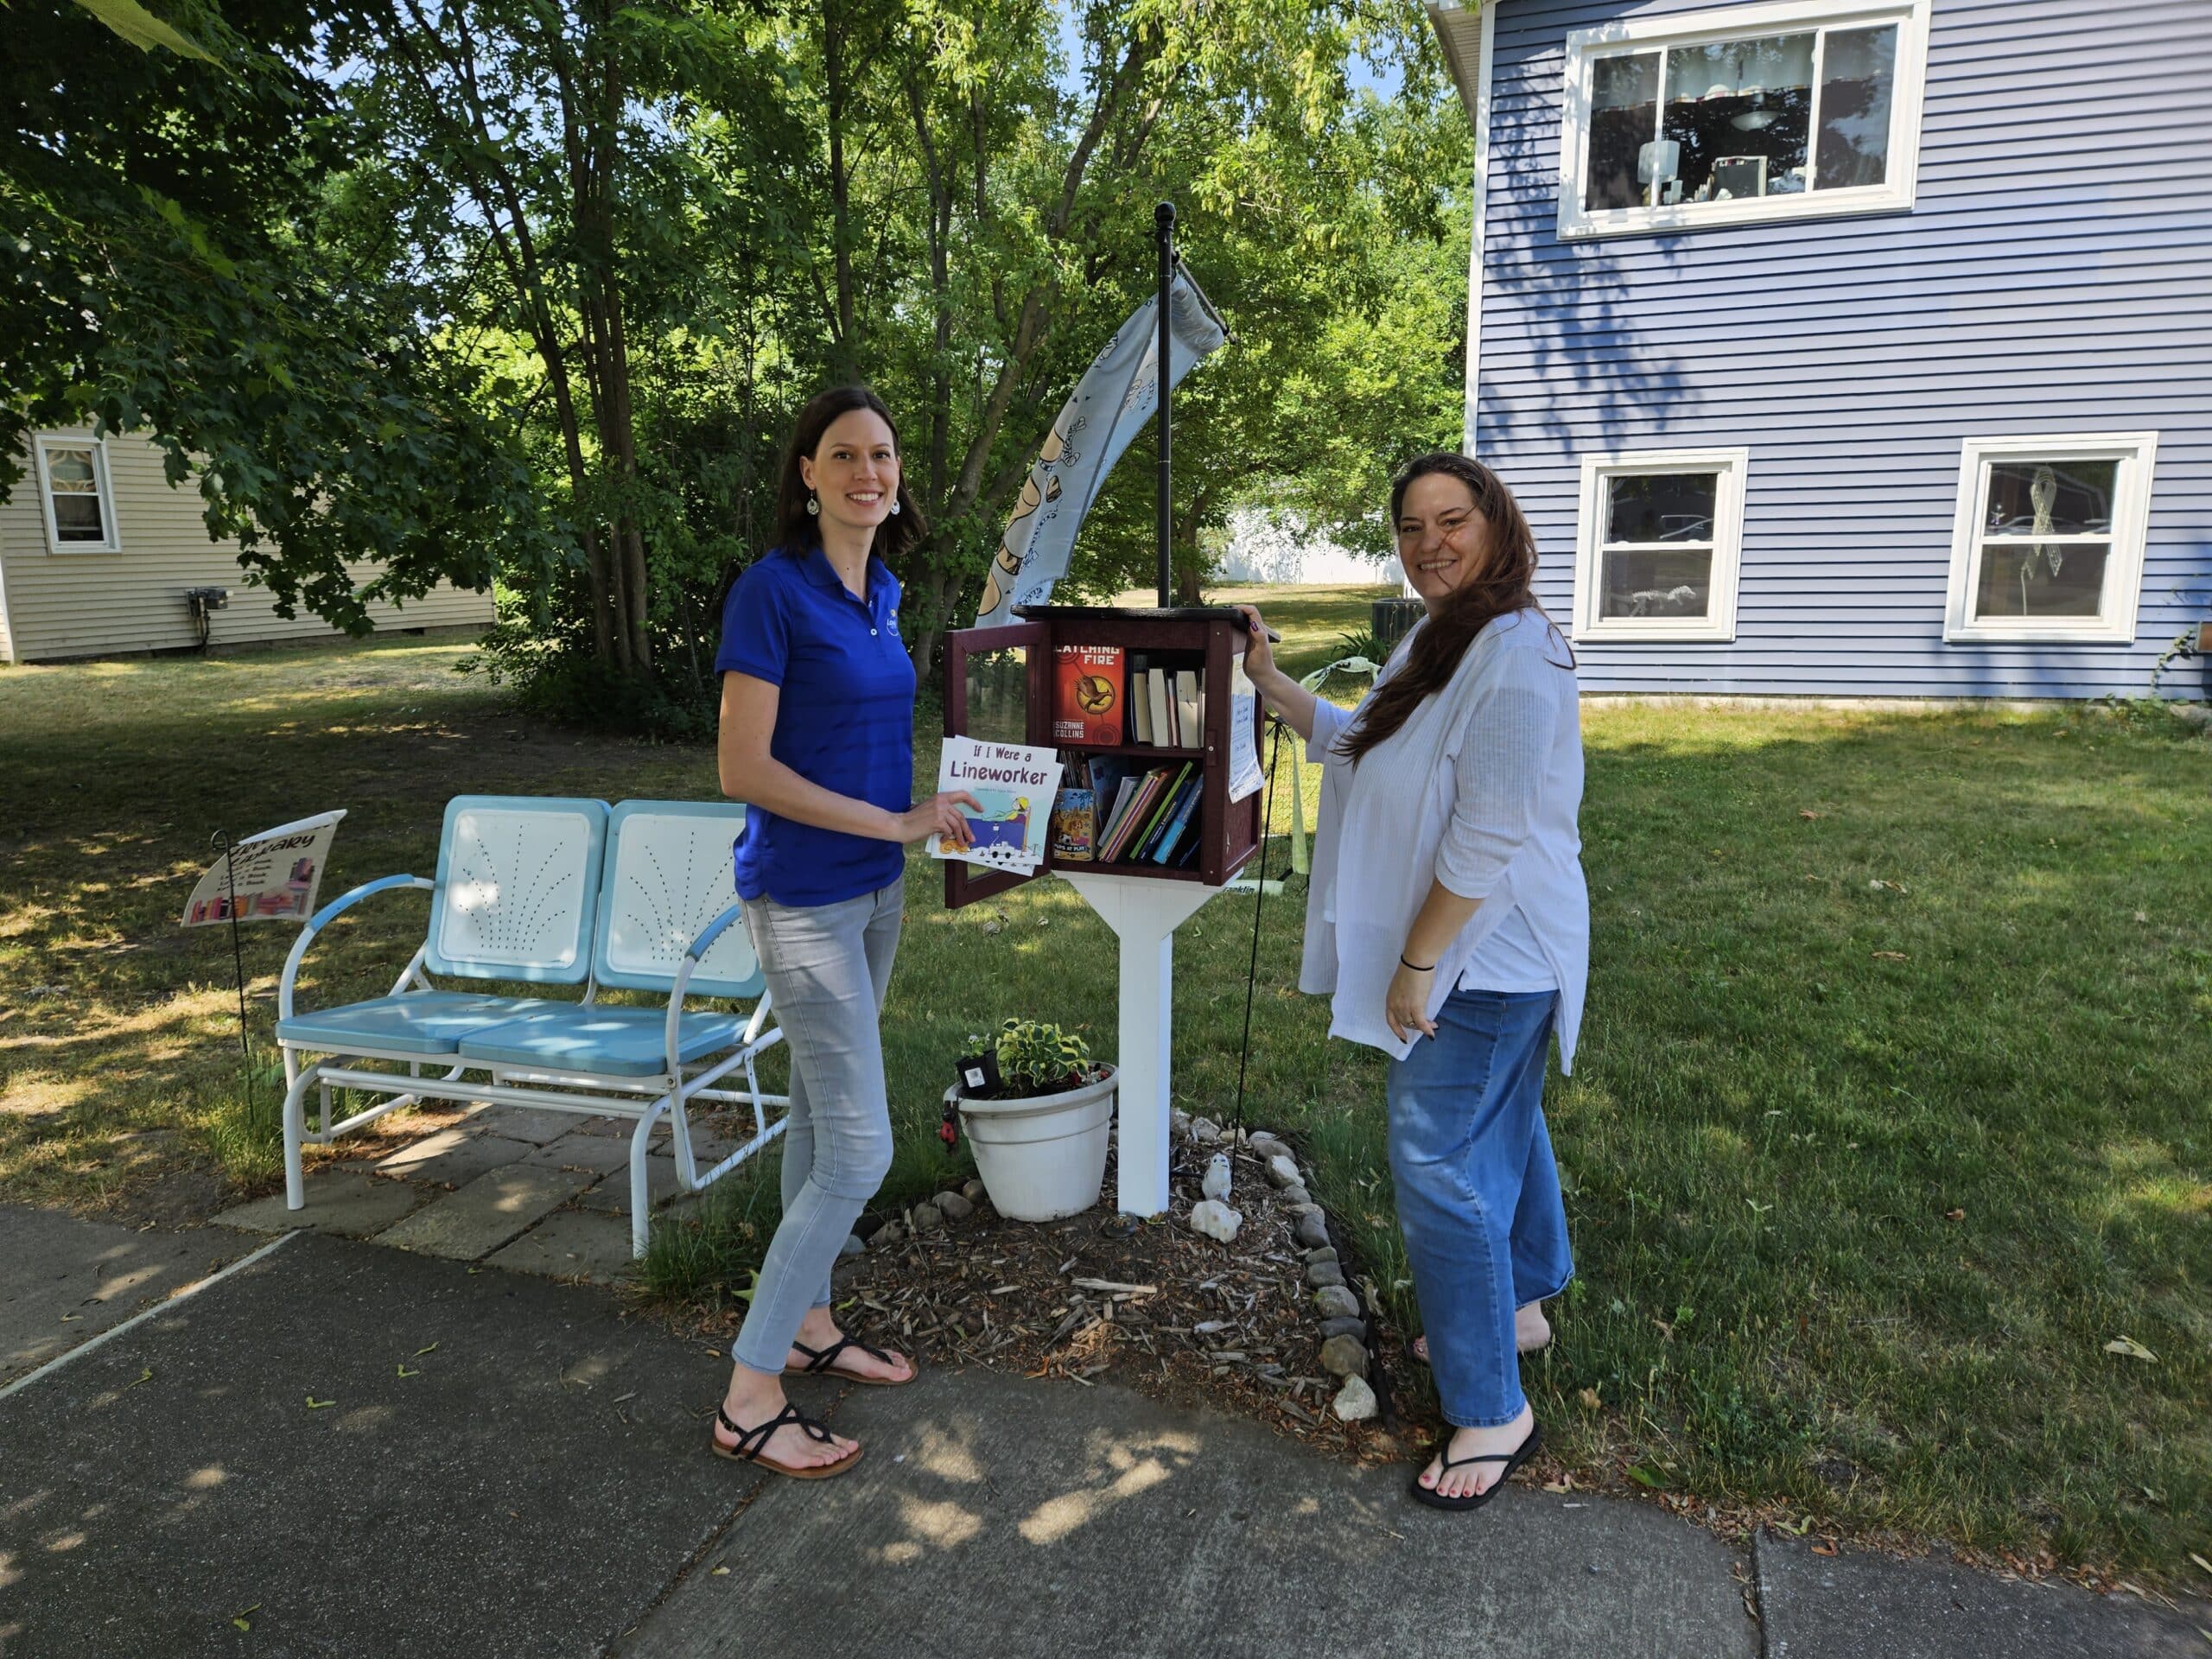 Little Libraries community project